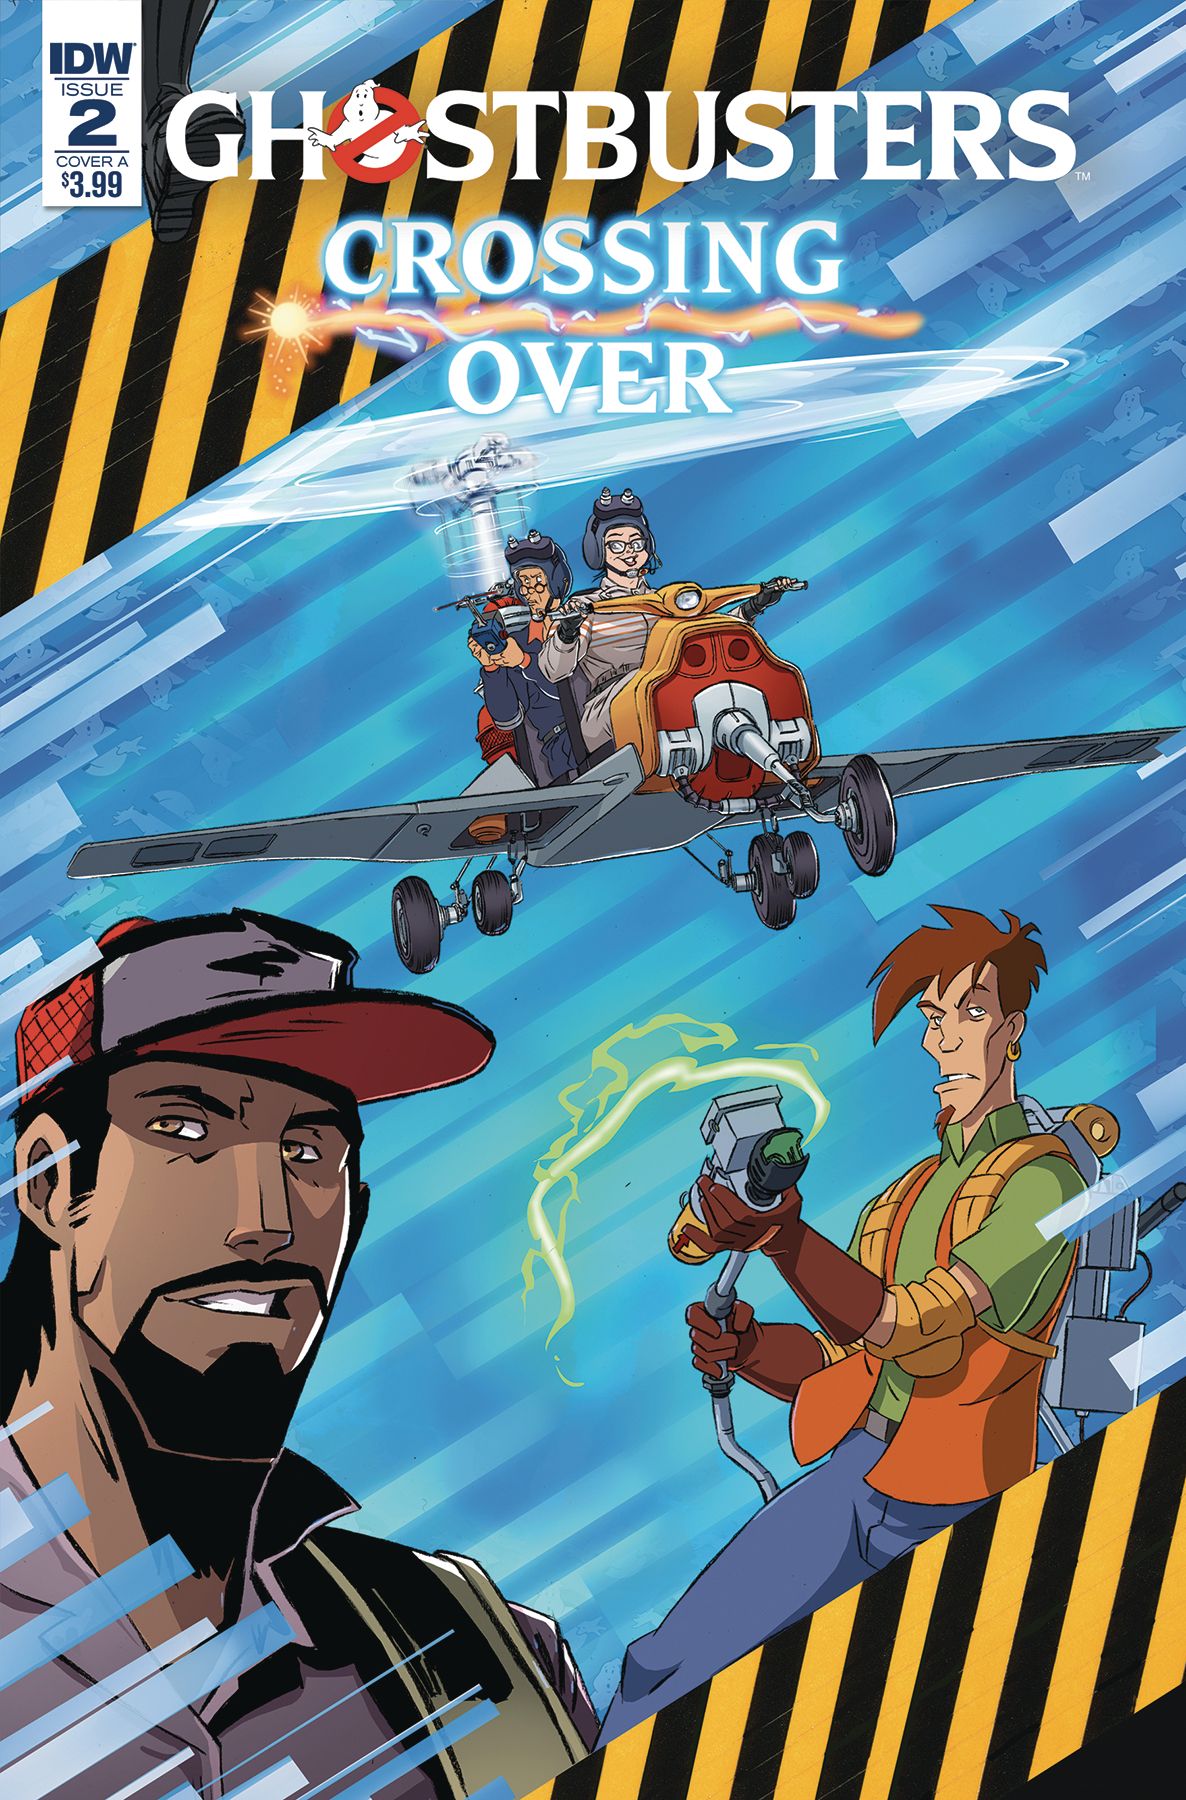 Ghostbusters: Crossing Over #2 Comic